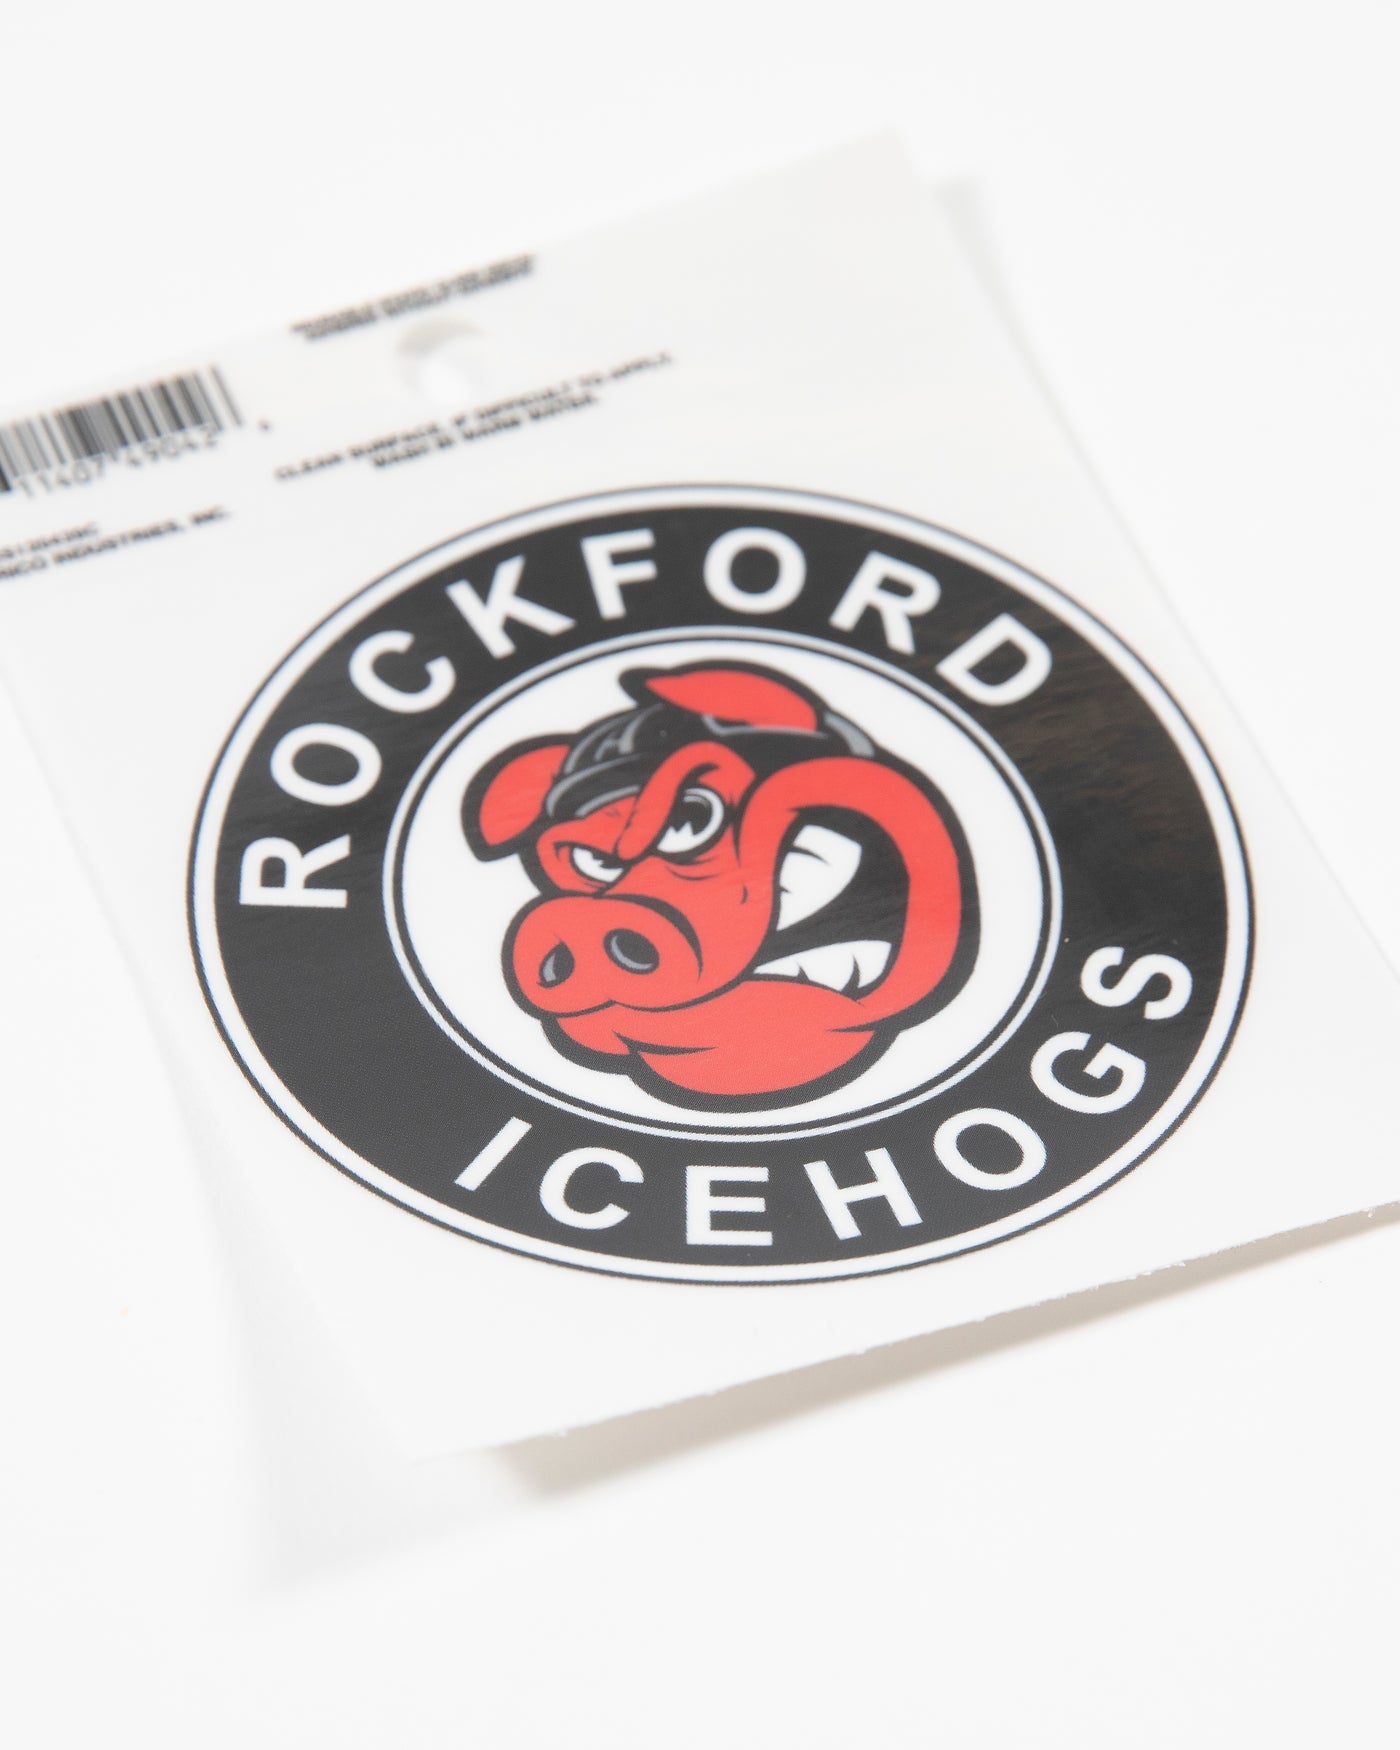 Black Rockford IceHogs decal with Hammy and classic logo - angled lay flat